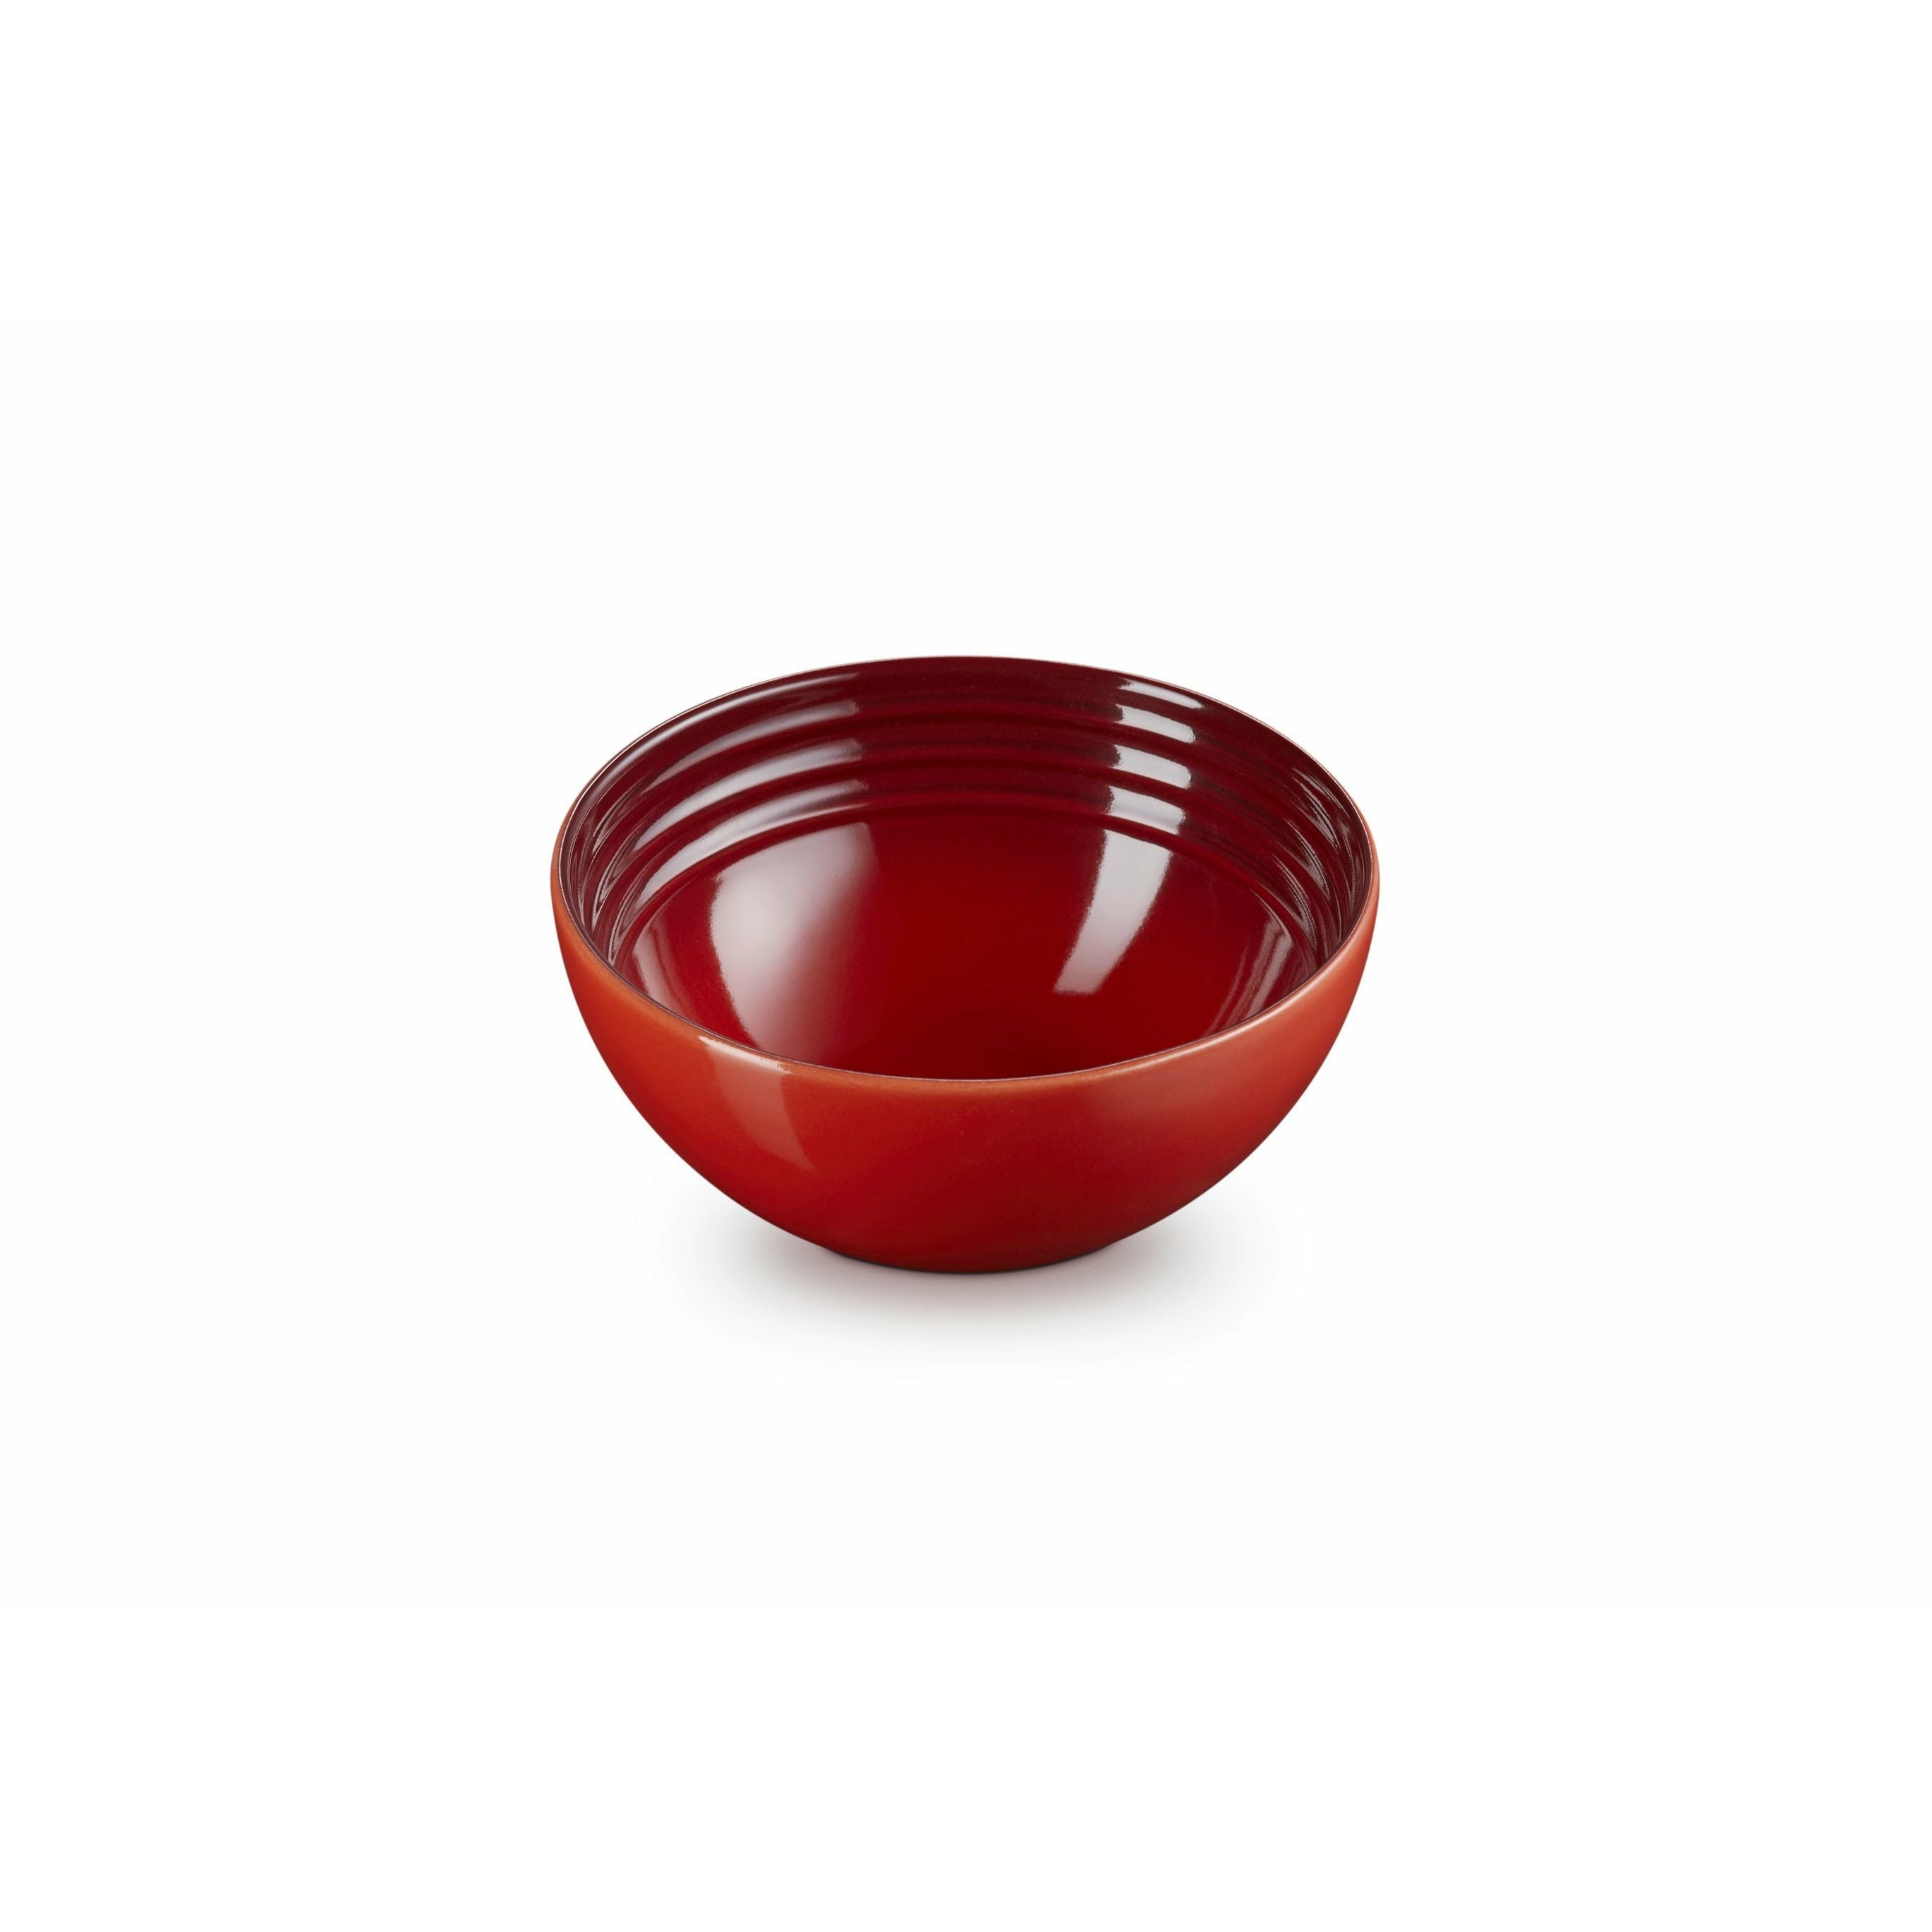 Le Creuset Snack Bowl 12 Cm, Cherry Red